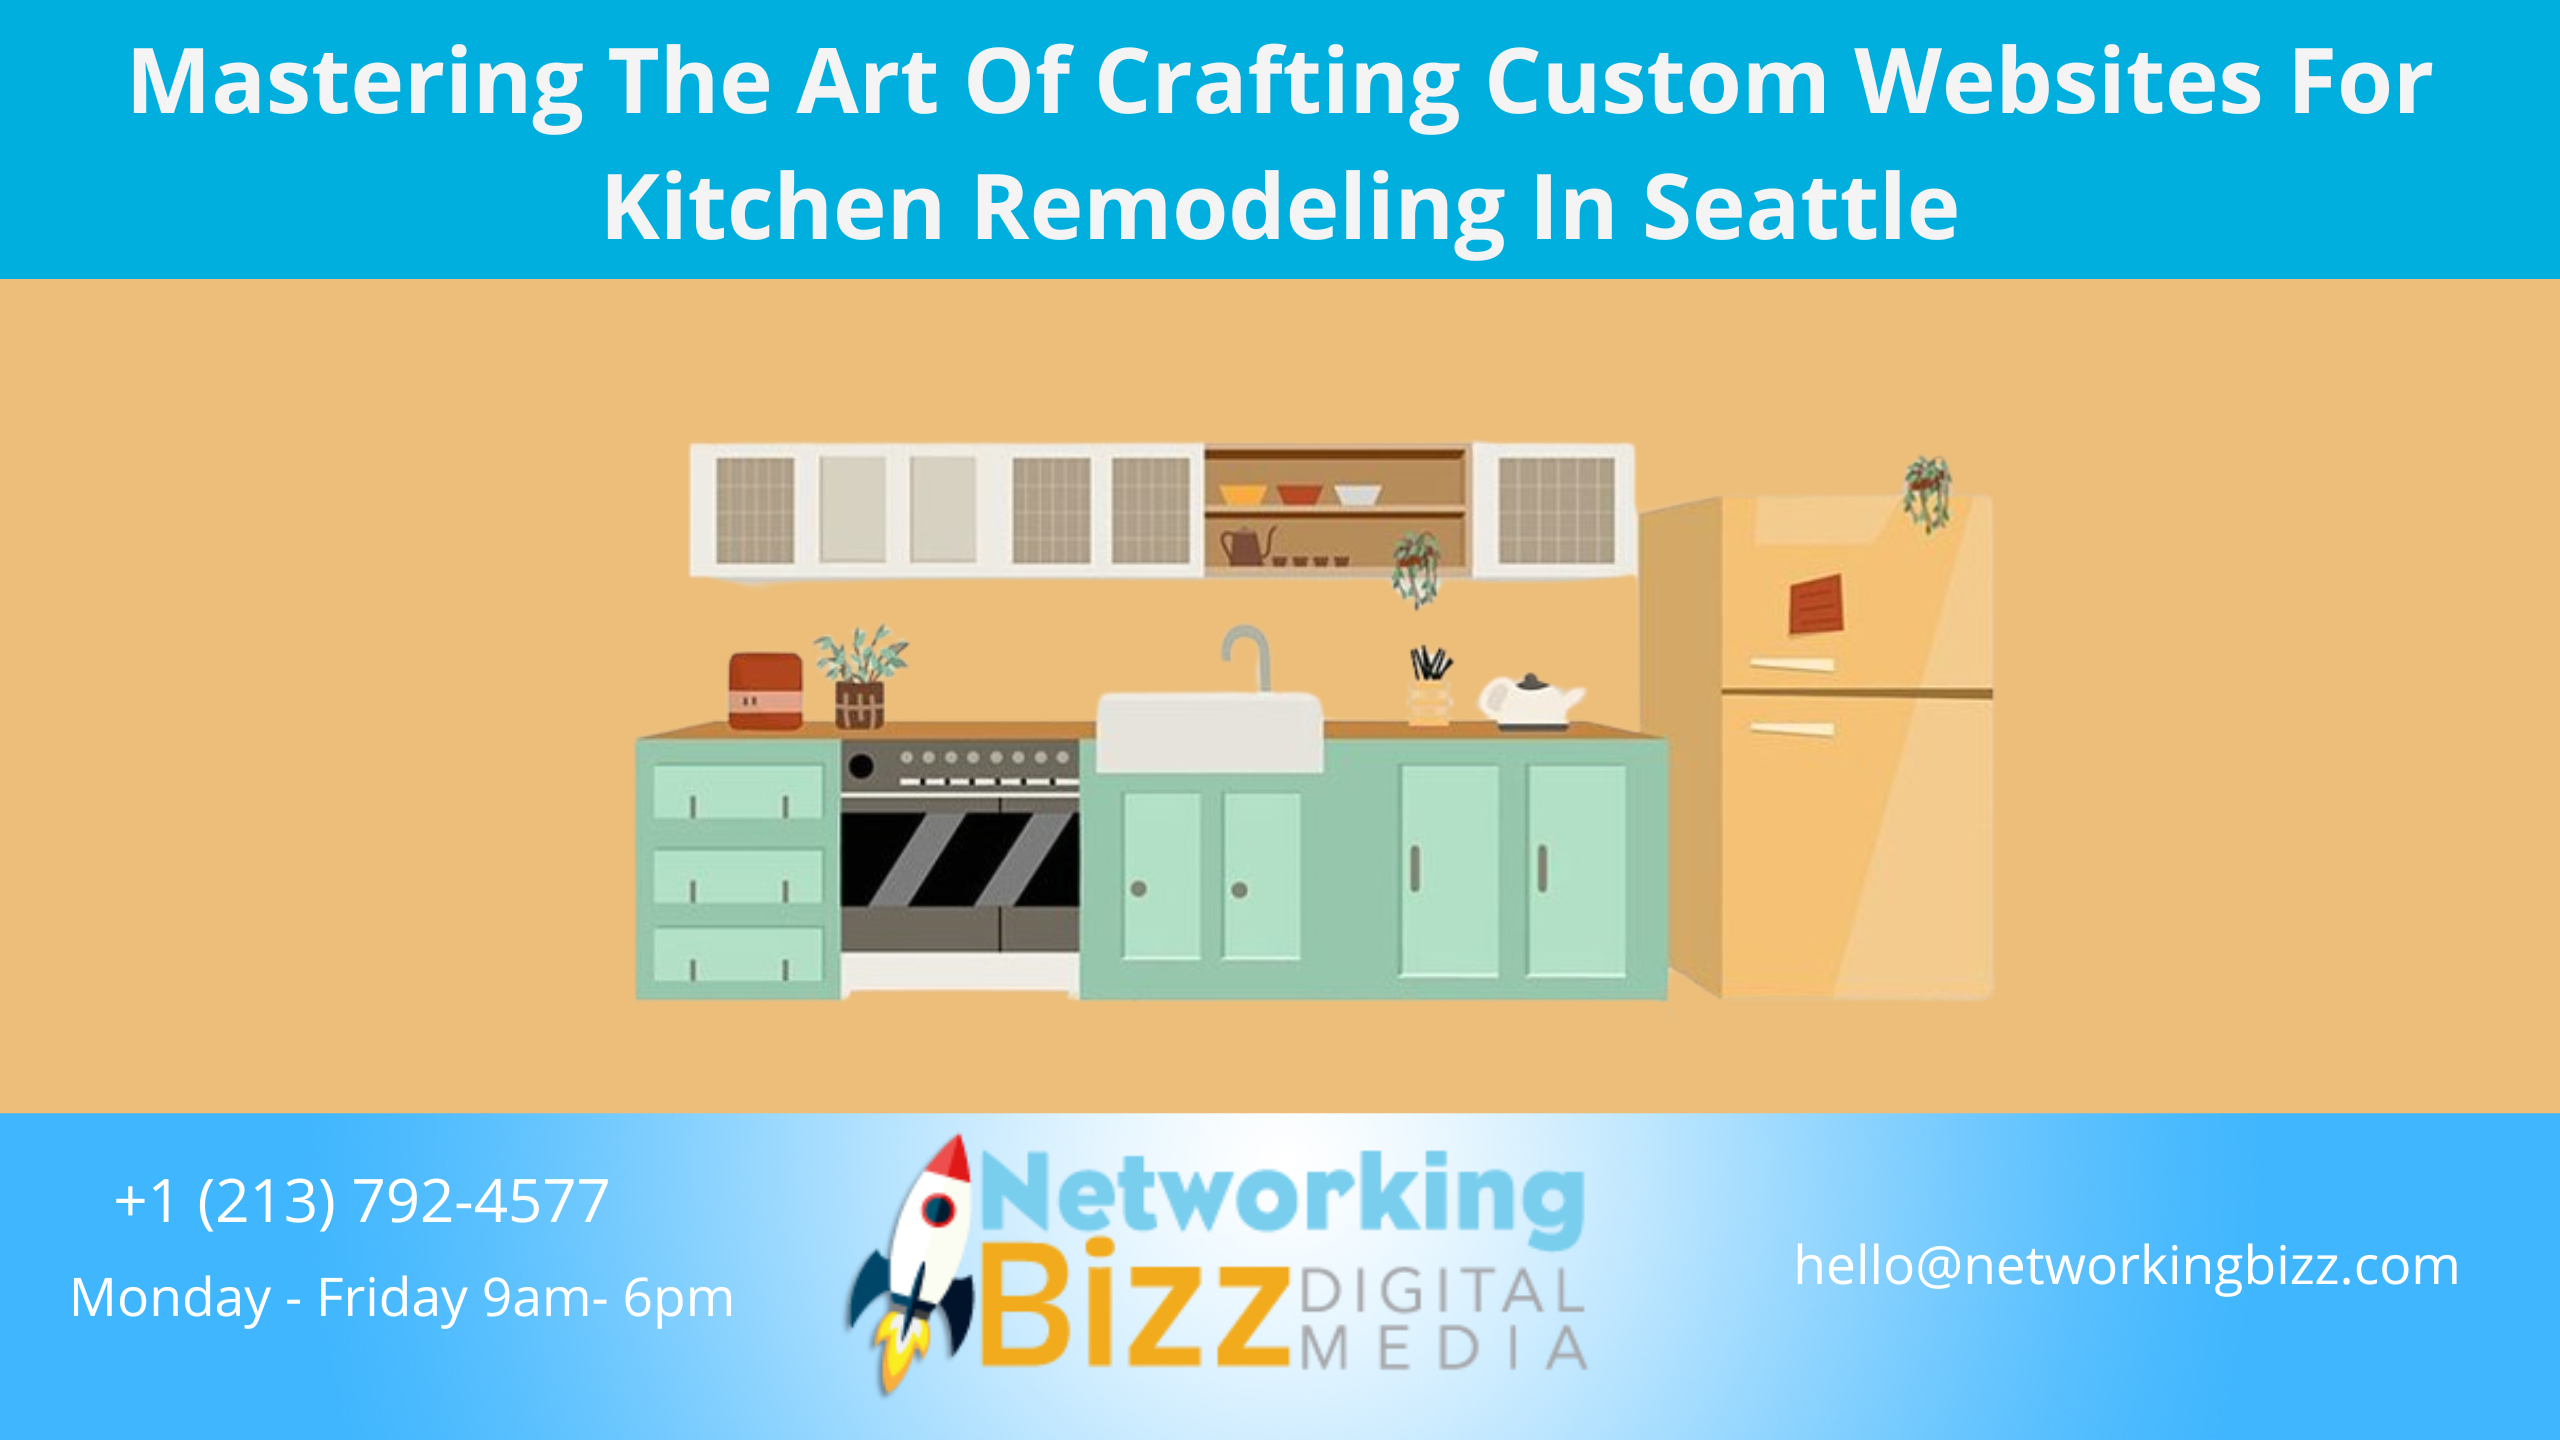 Mastering The Art Of Crafting Custom Websites For Kitchen Remodeling In Seattle